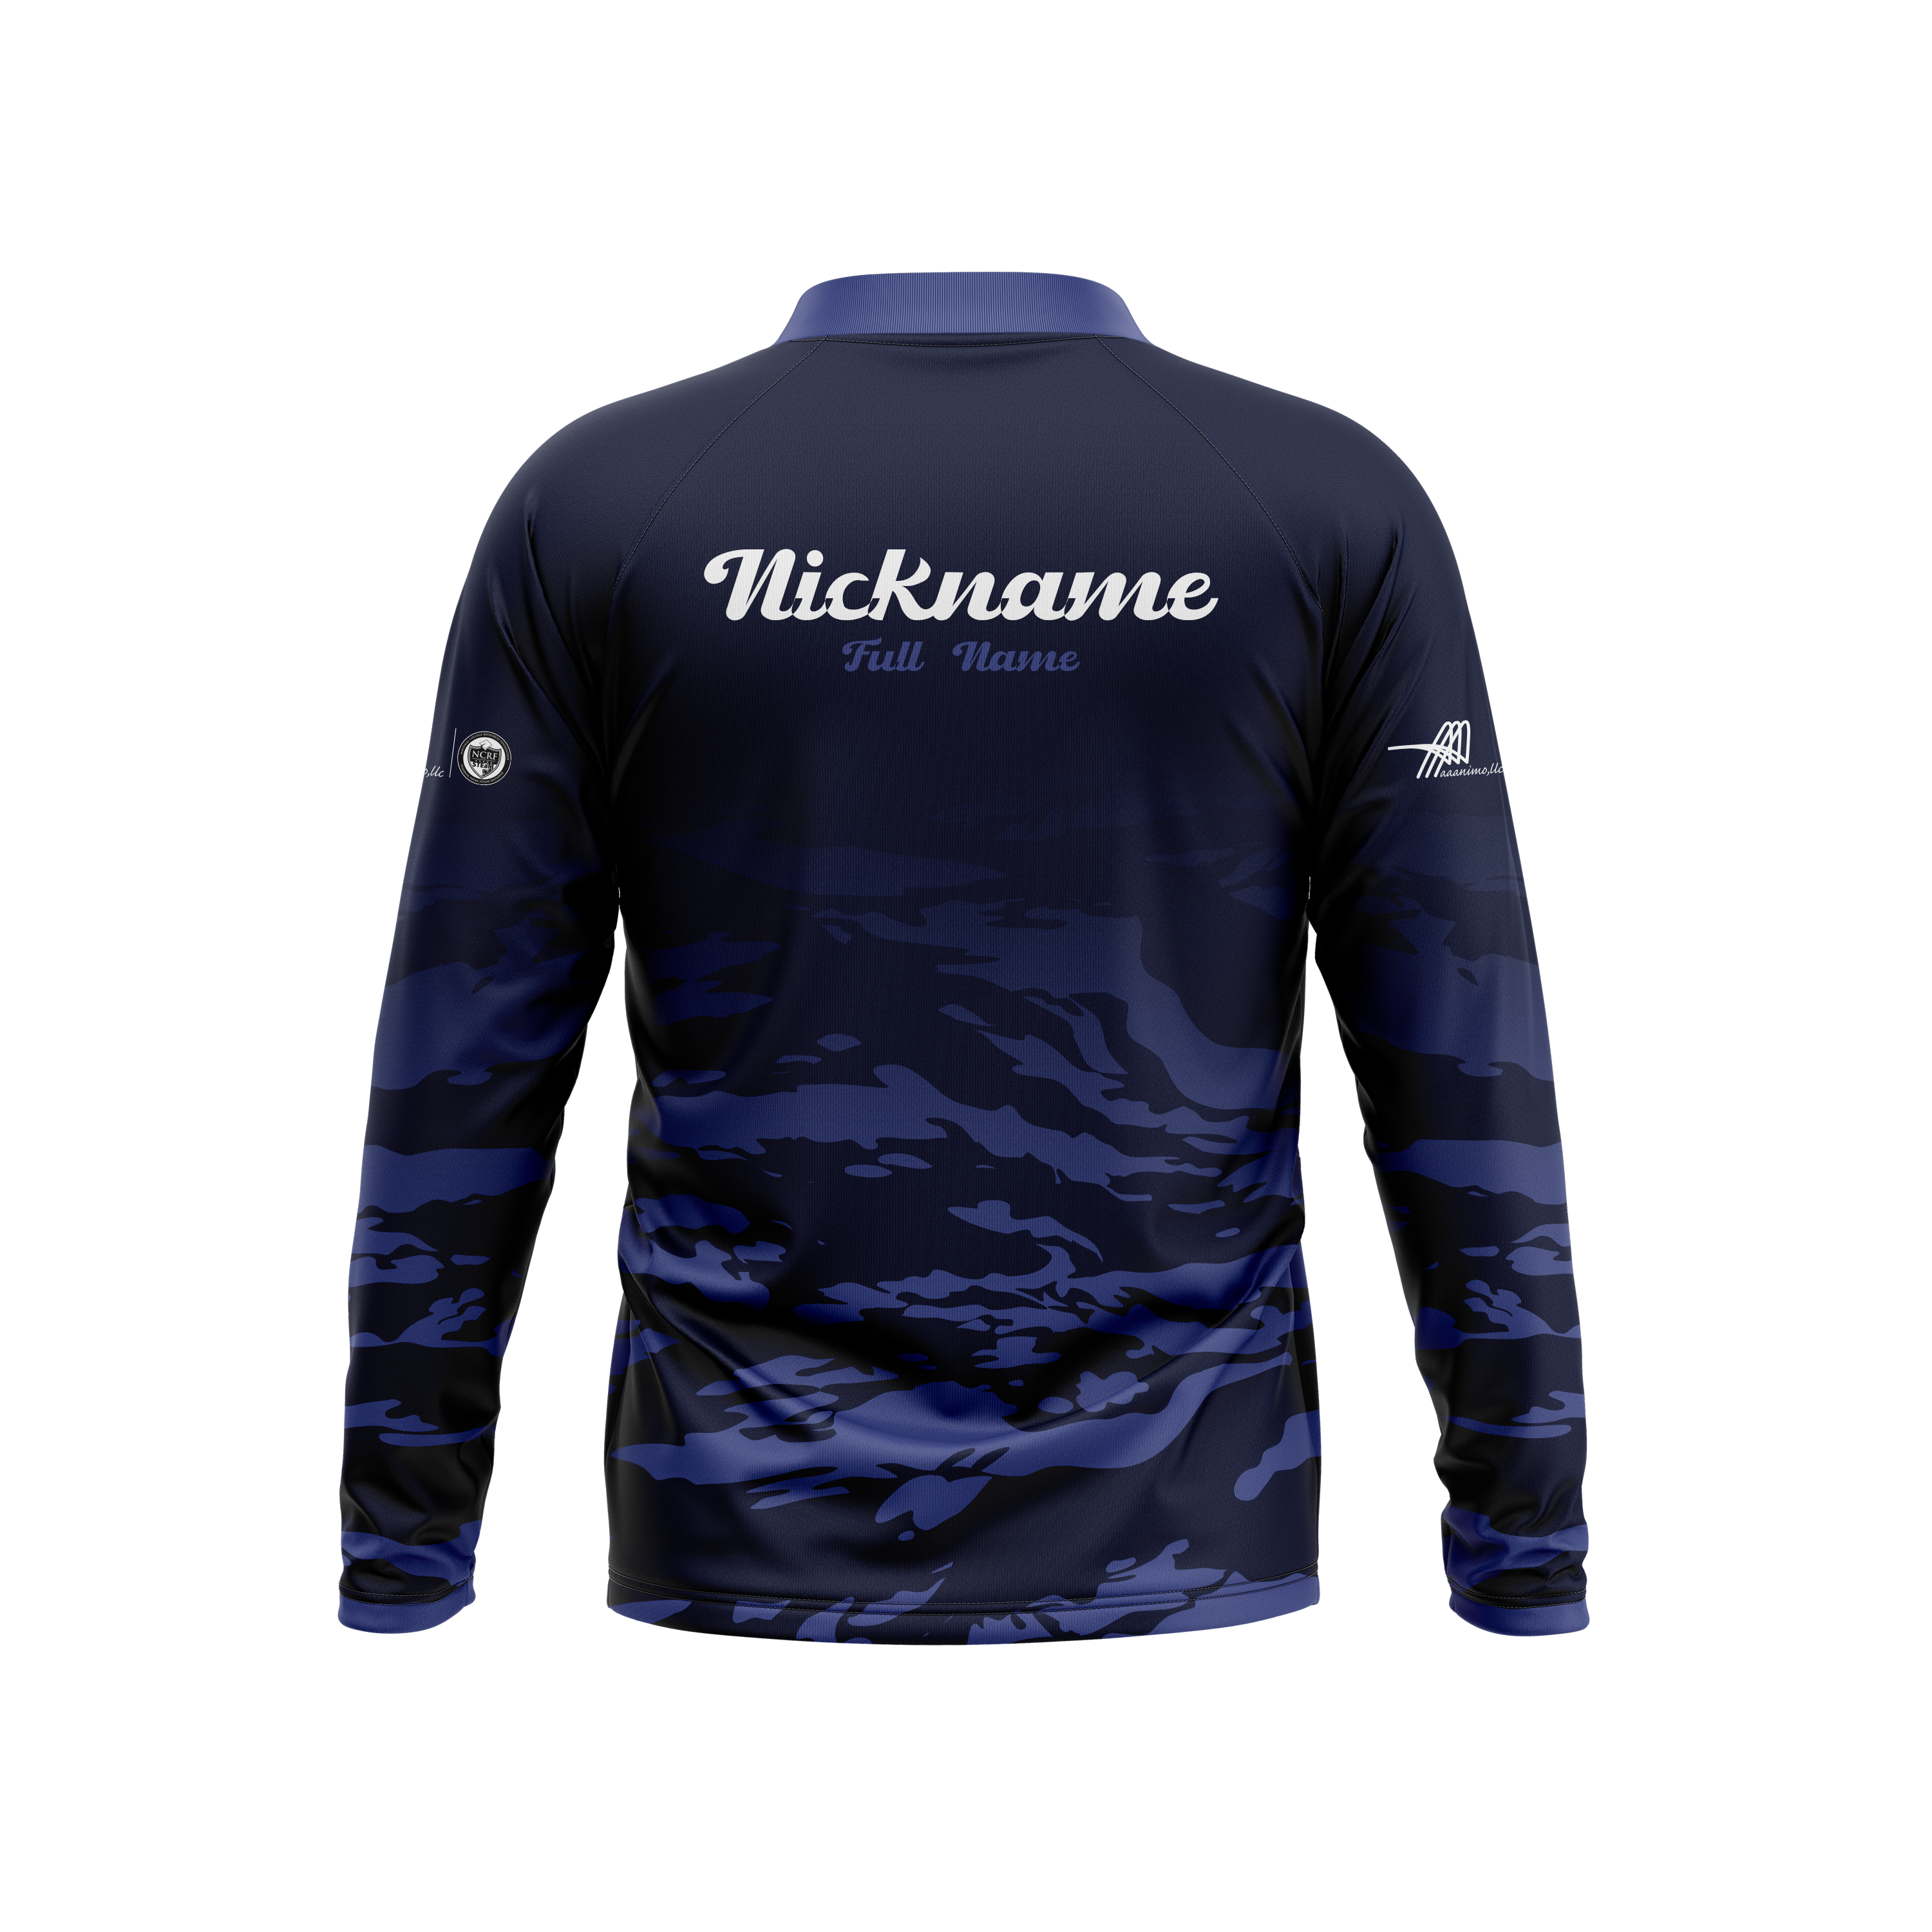 The Vintage Long Sleeve Jersey